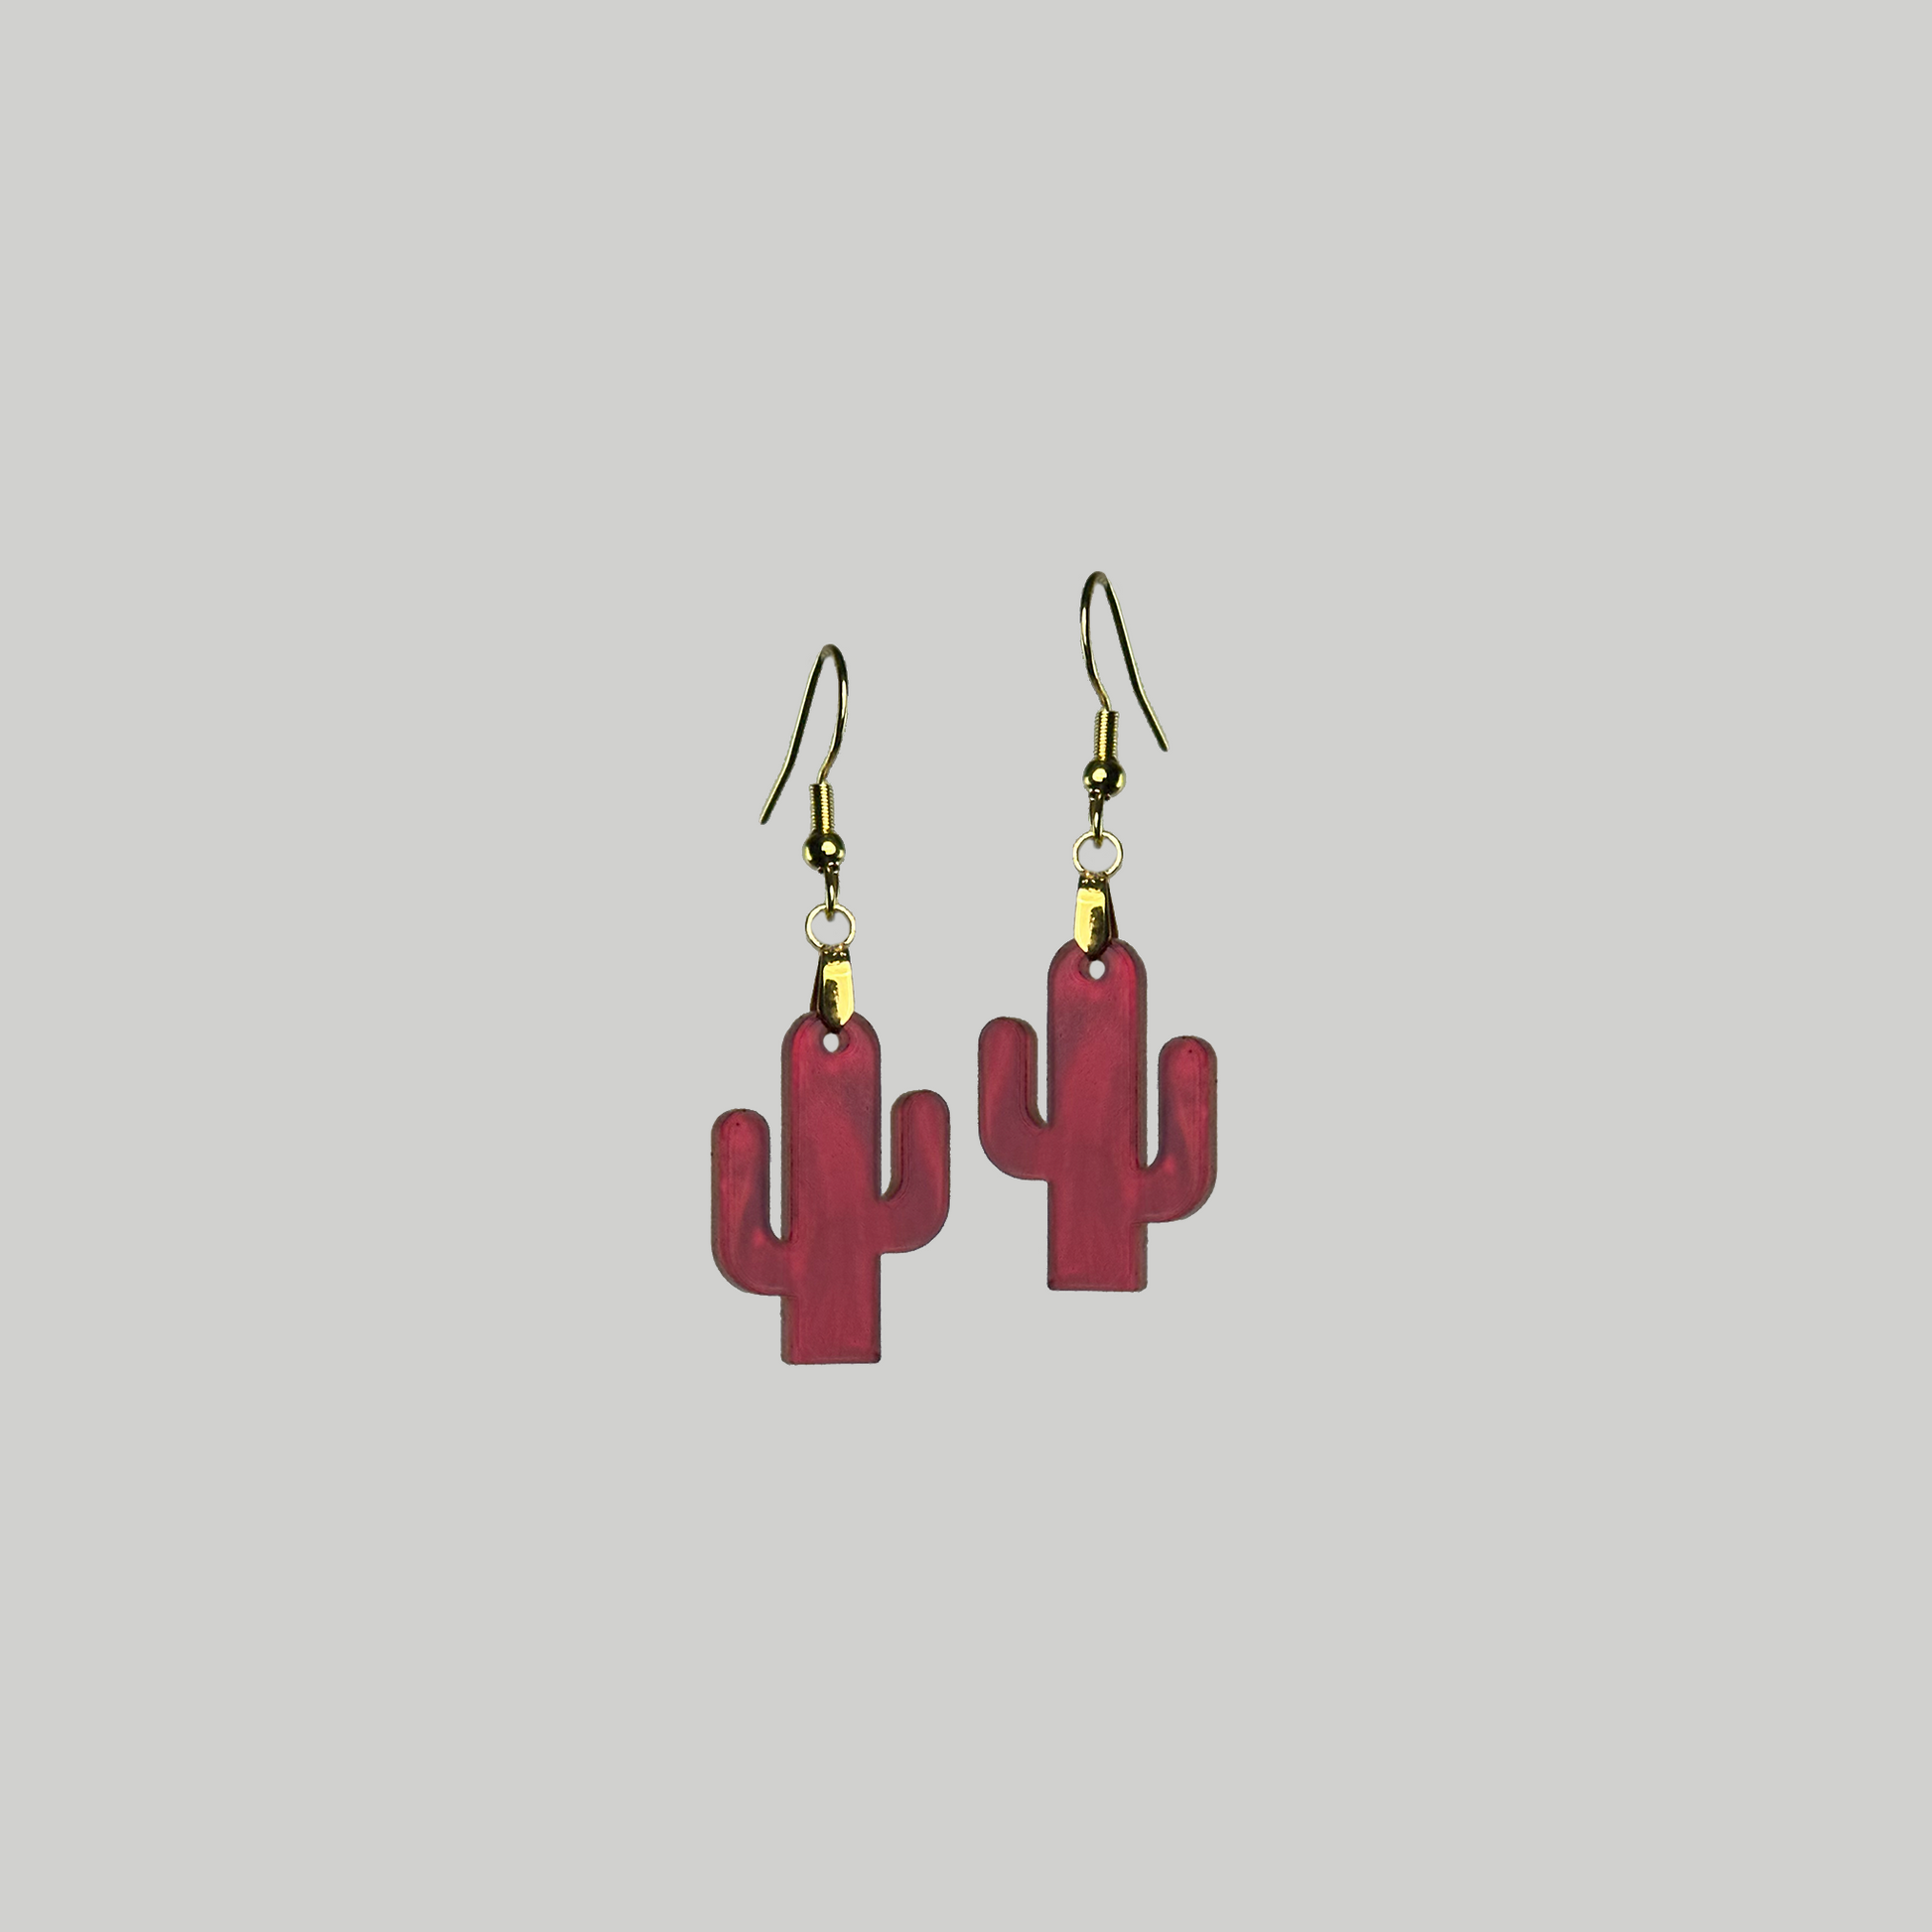 Desert Chic Cactus Earrings: Stylish and trendy, these earrings showcase cute cactus designs for a touch of southwestern charm.